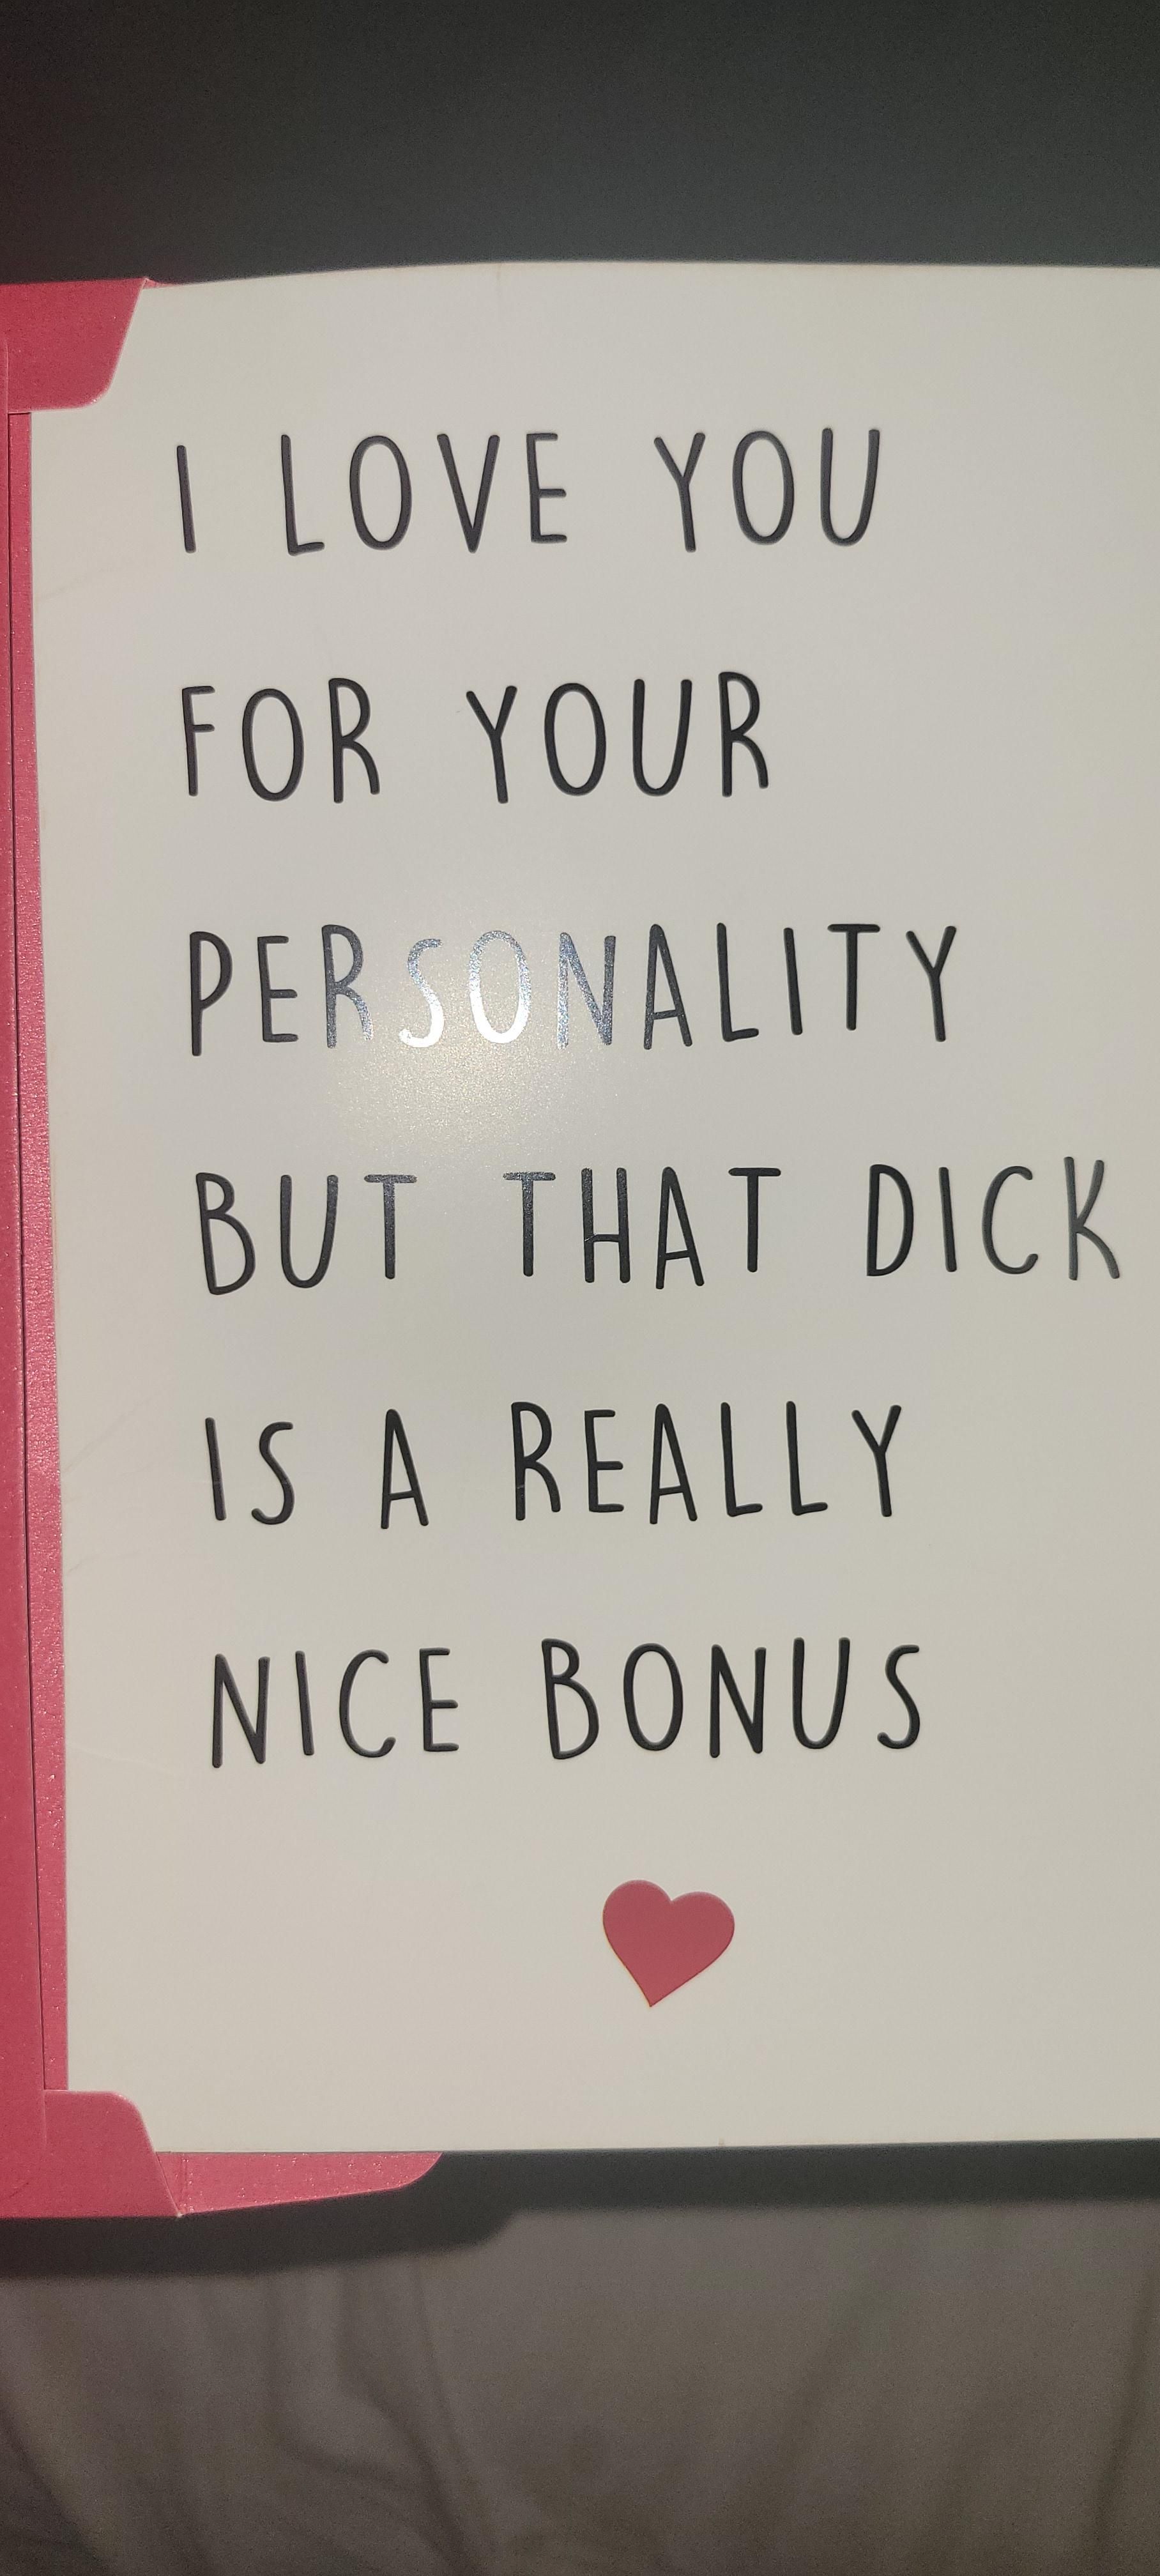 So my wife got me this card and forgot to give it to me this morning. I just came upstairs and found this laying on my pillow.